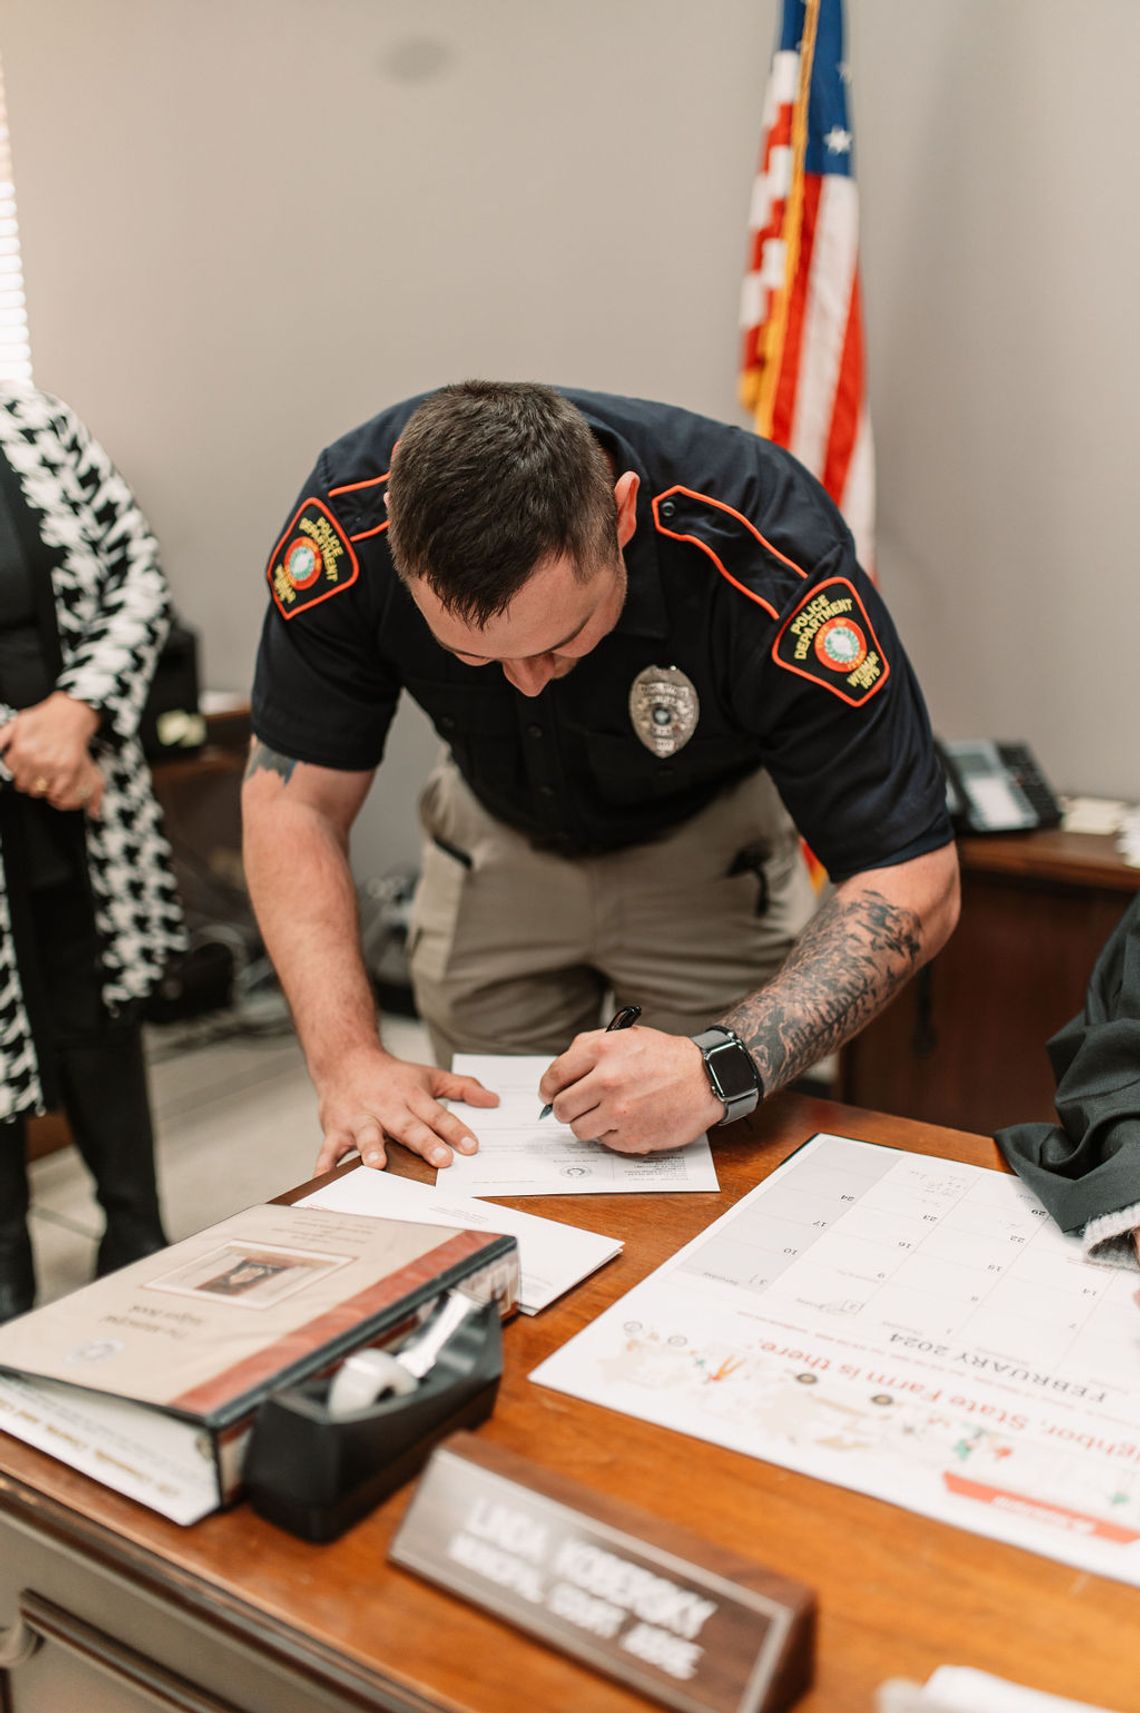 New officer sworn in at Weimar Police